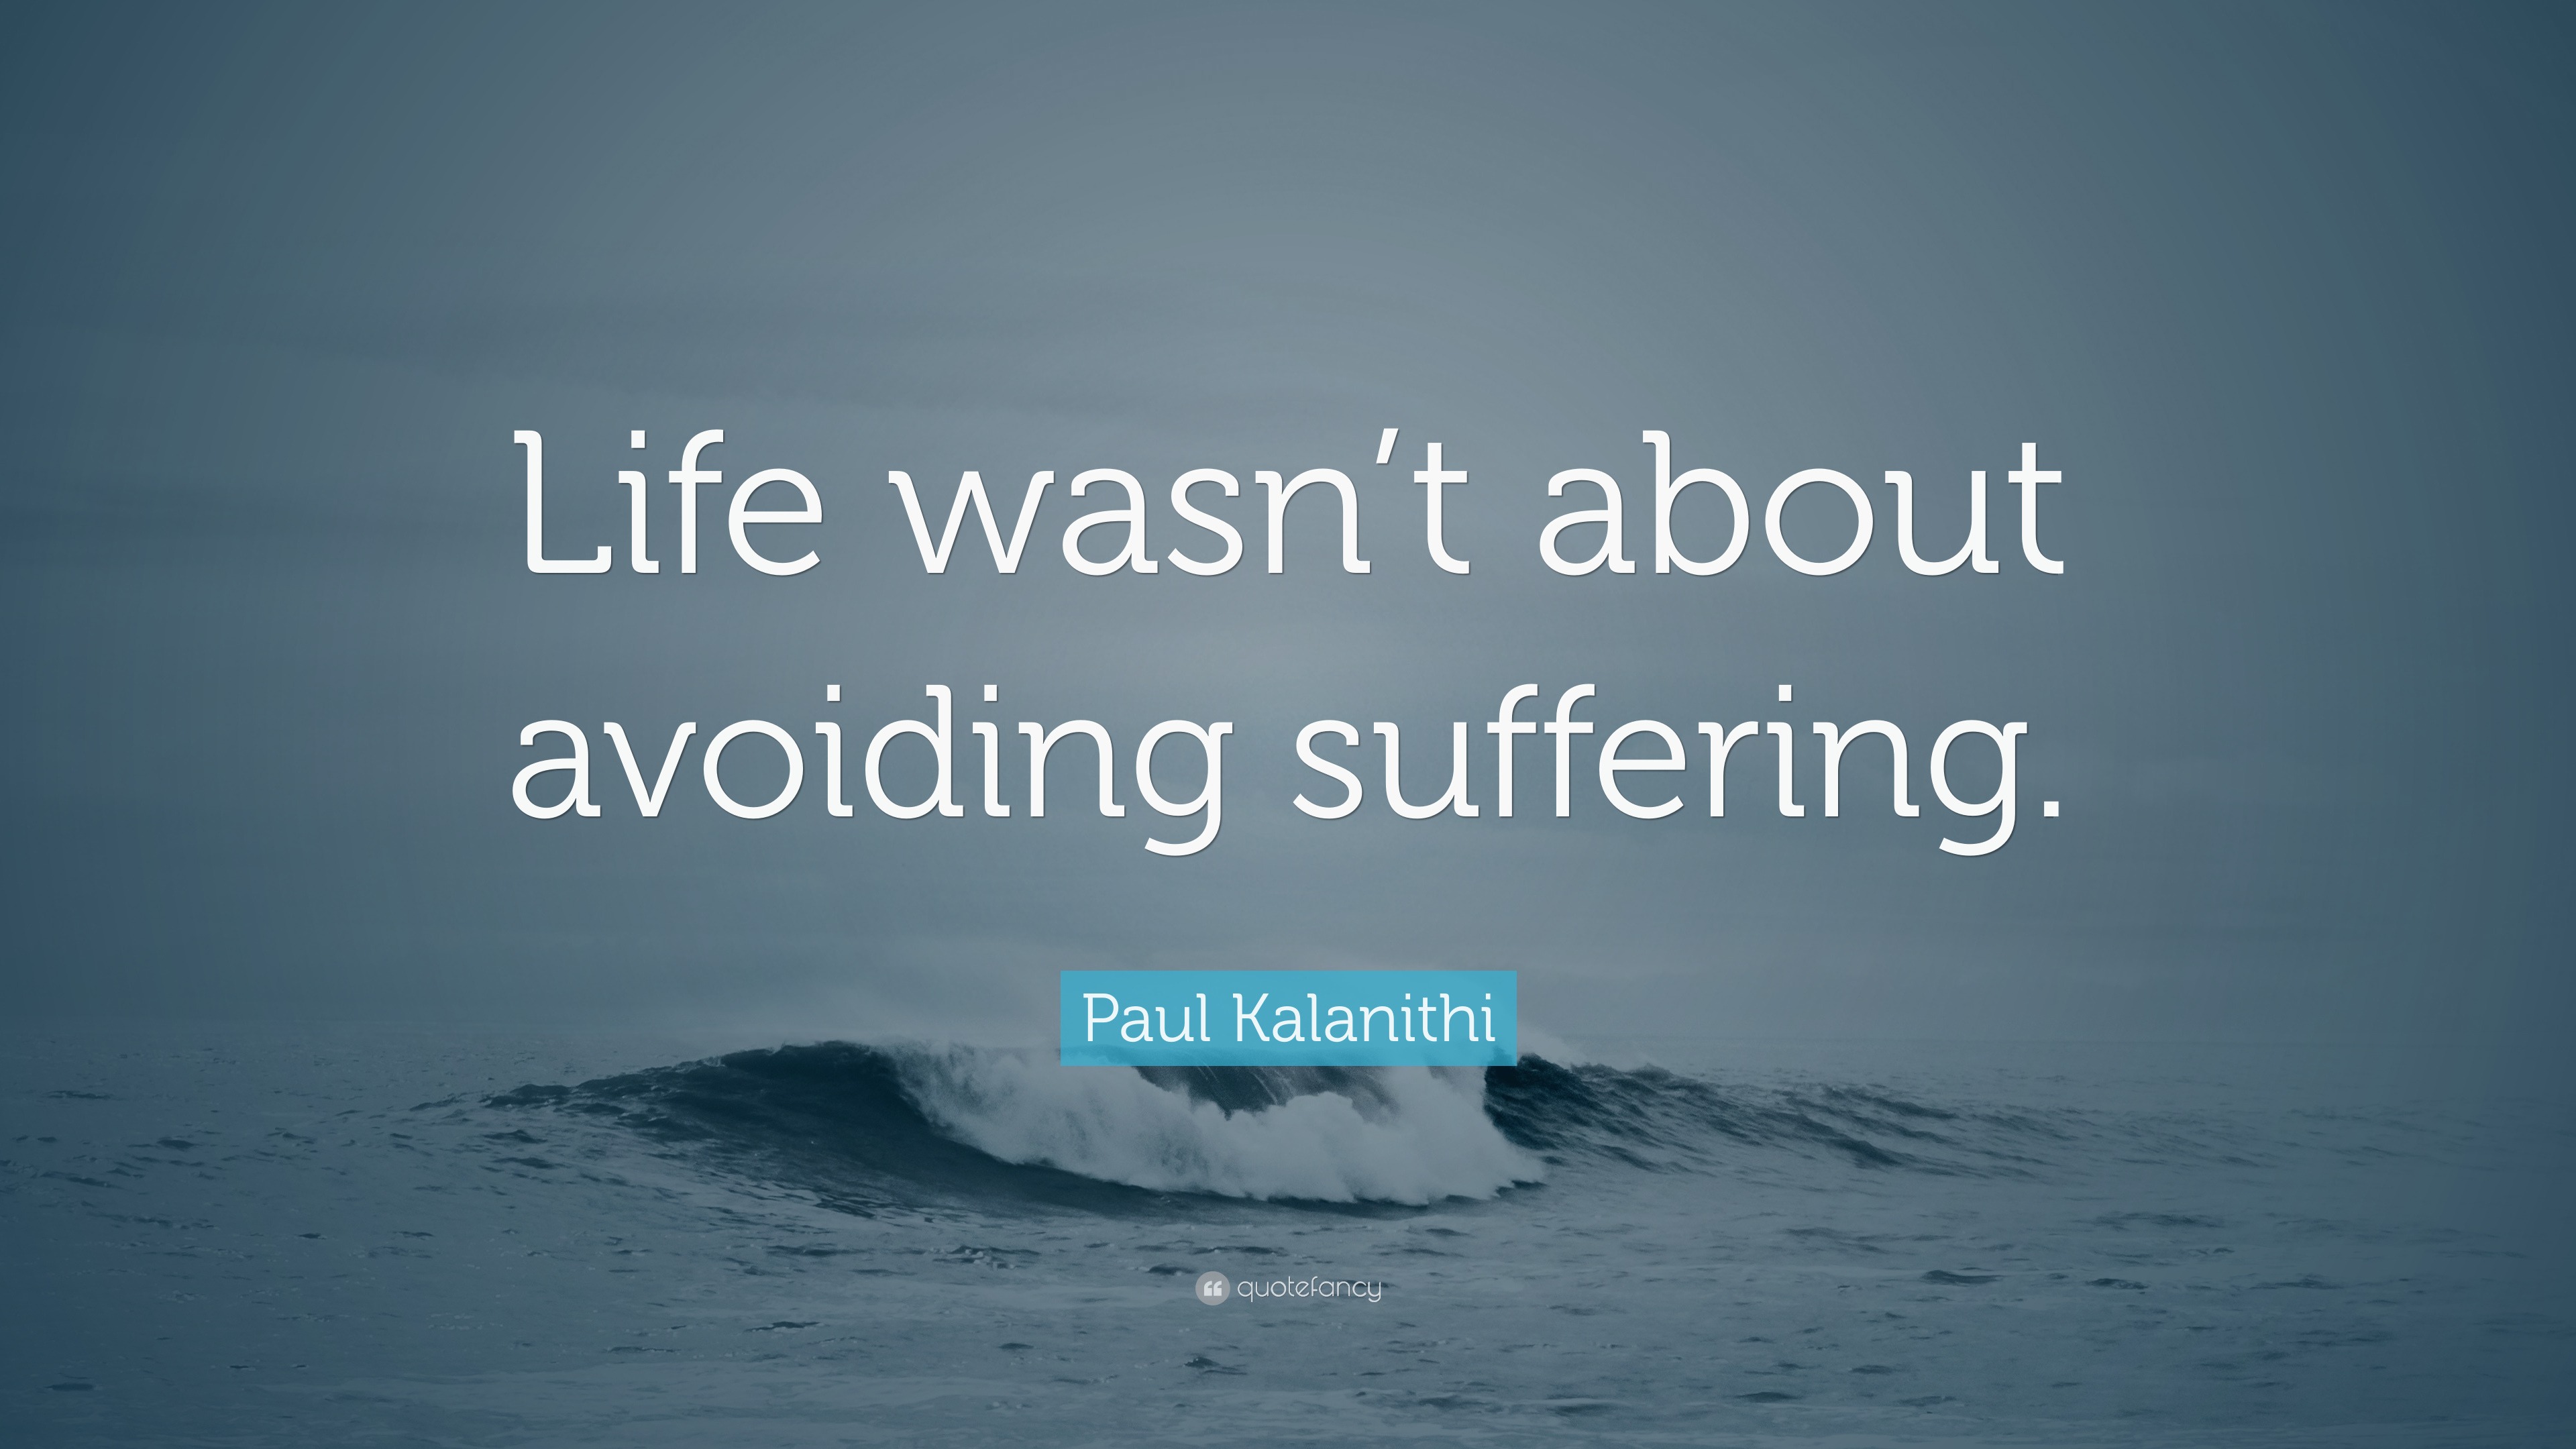 Paul Kalanithi Quote: “Life wasn’t about avoiding suffering.”